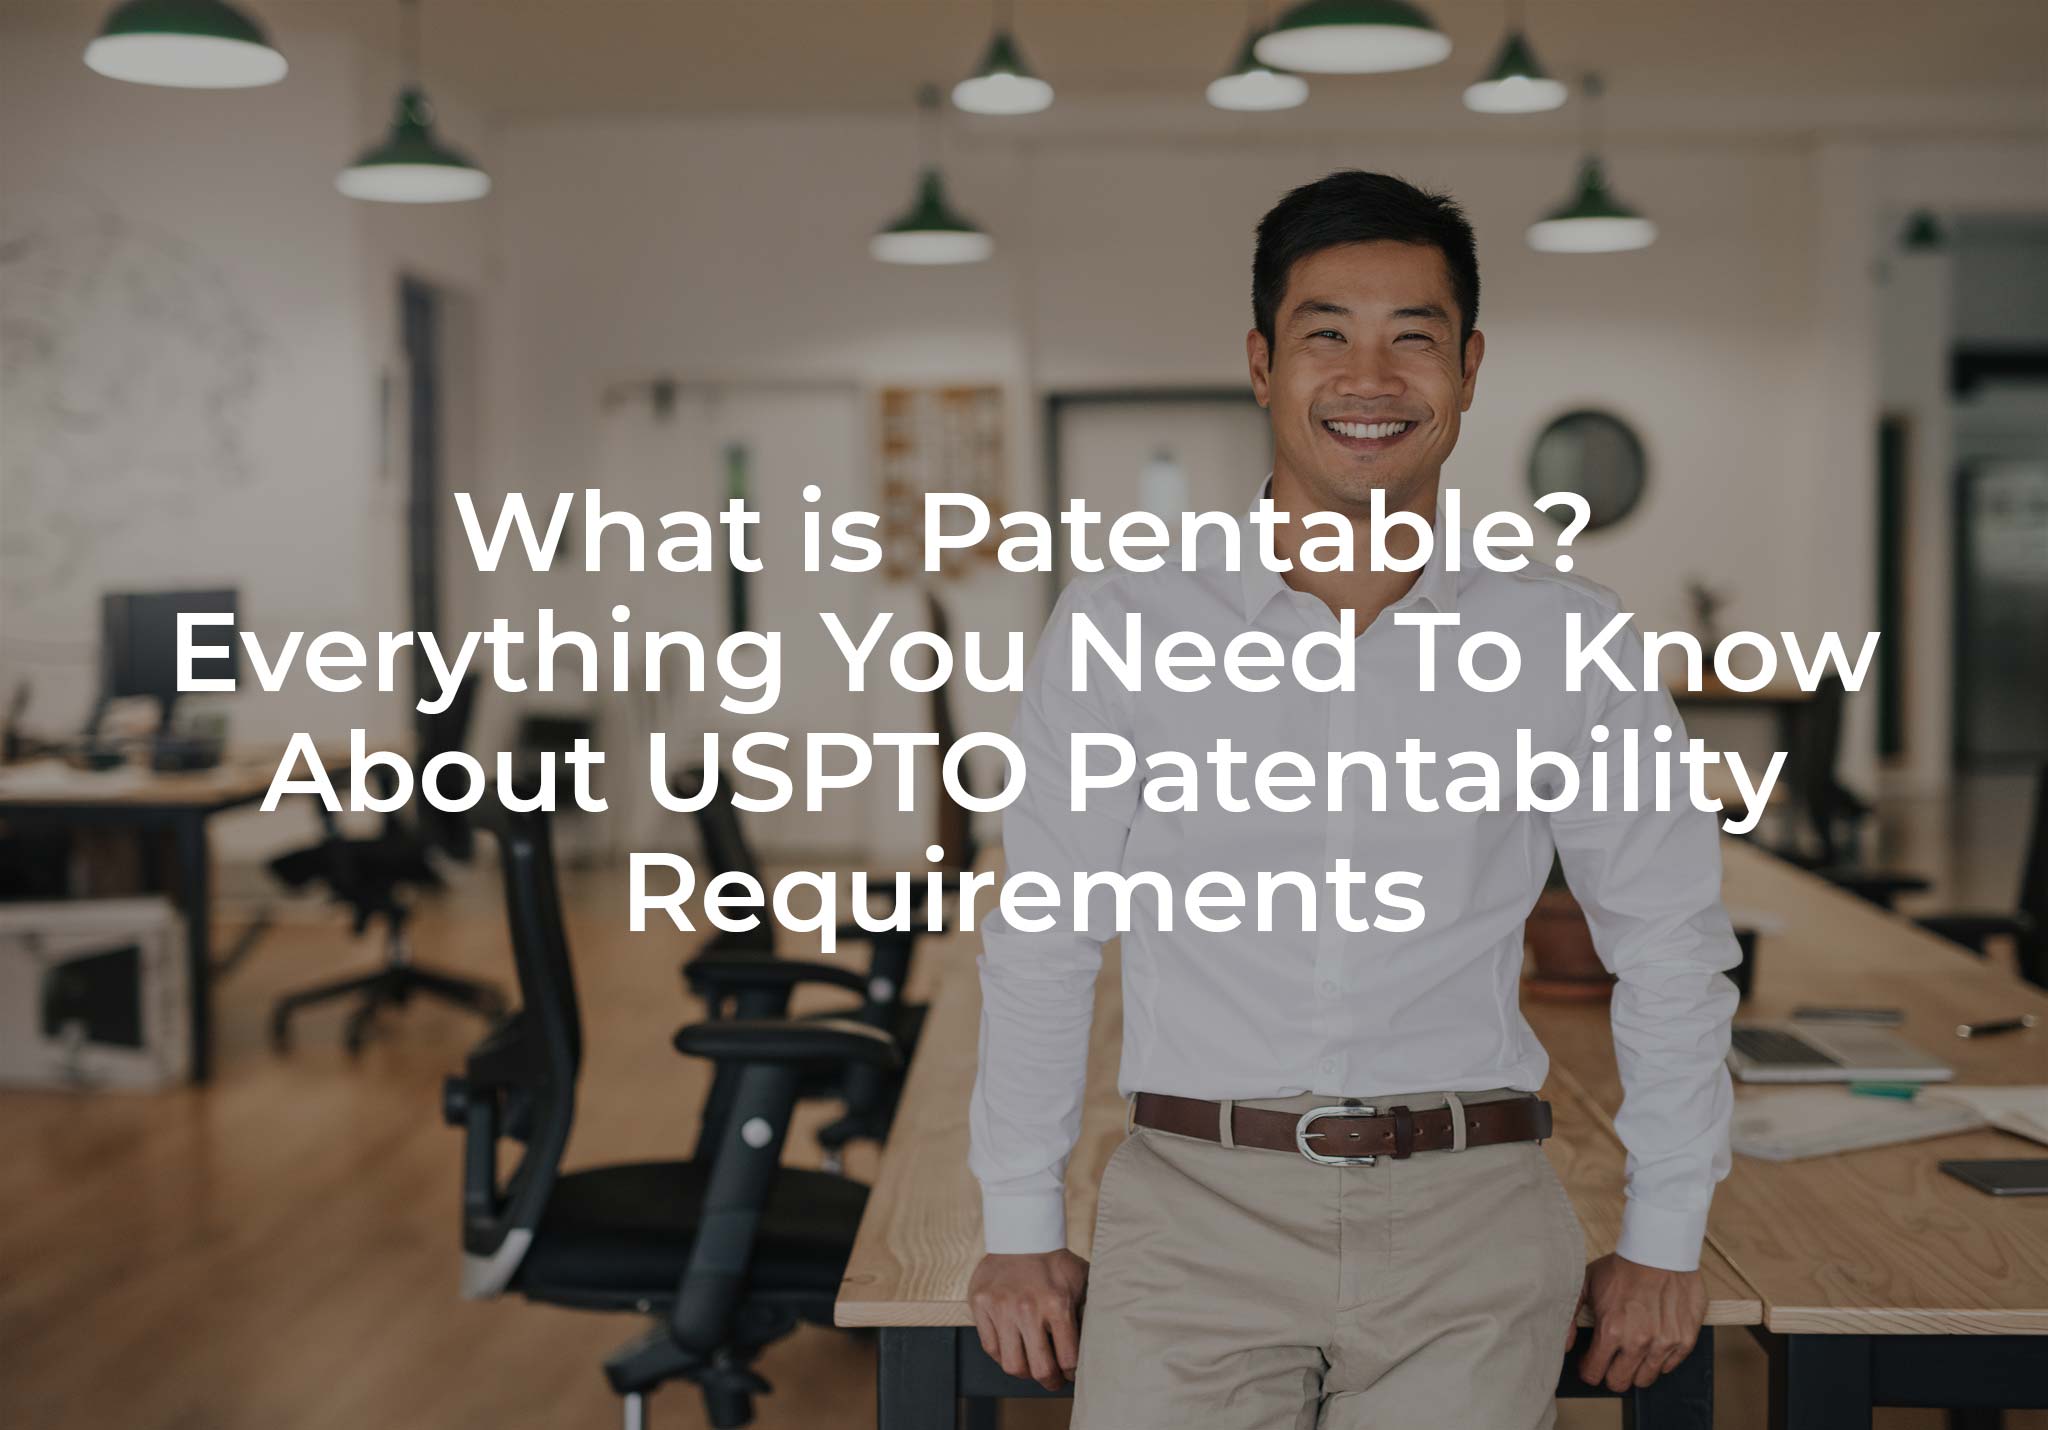 What is Patentable? Everything You Need To Know About USPTO Patentability Requirements